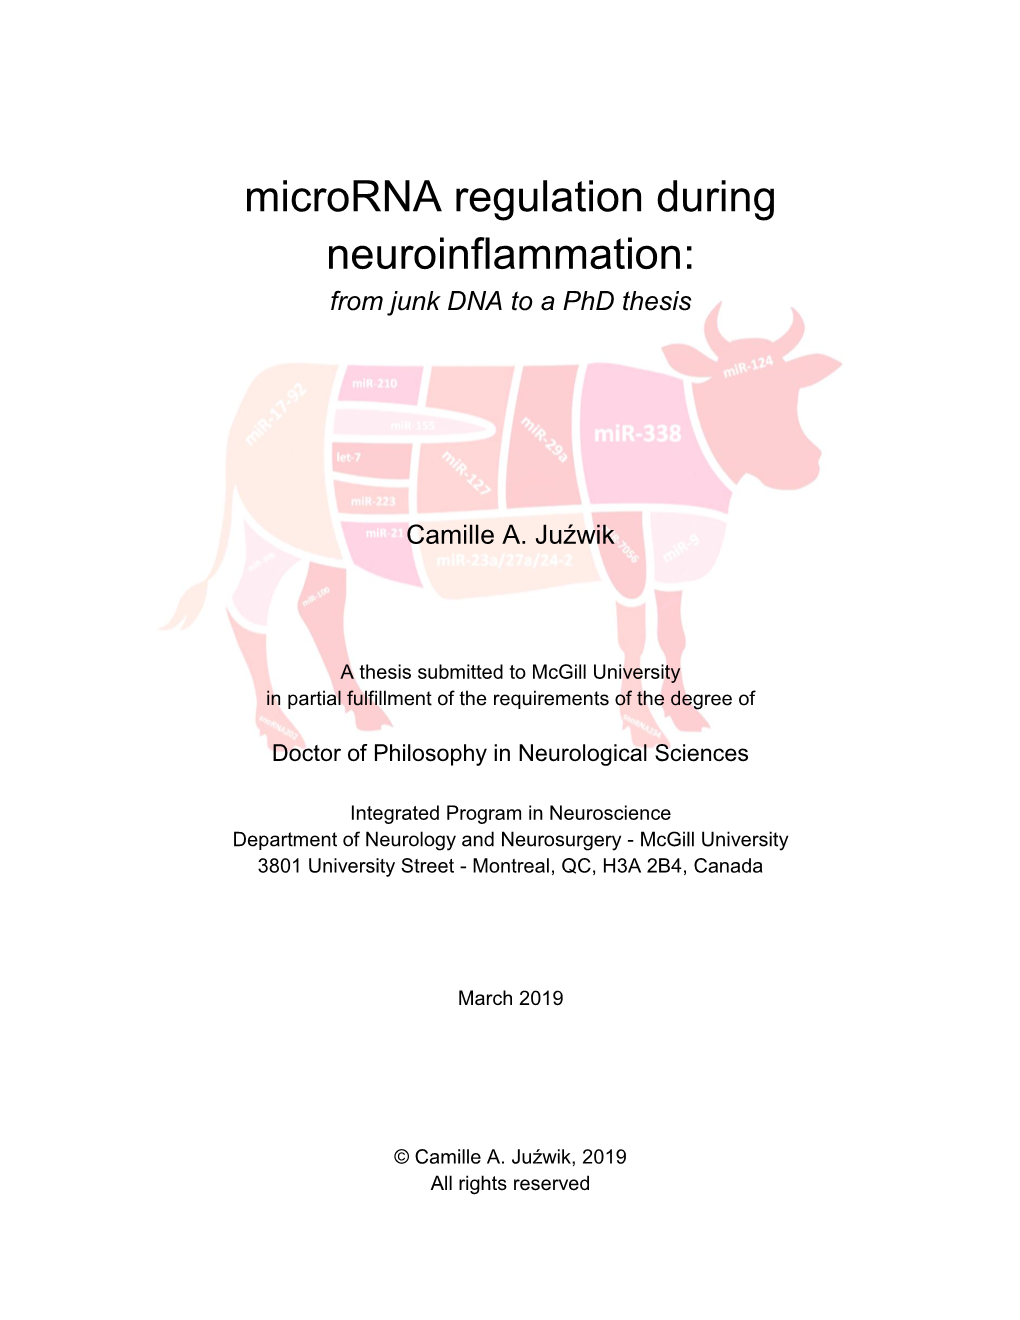 Microrna Regulation During Neuroinflammation: from Junk DNA to a Phd Thesis